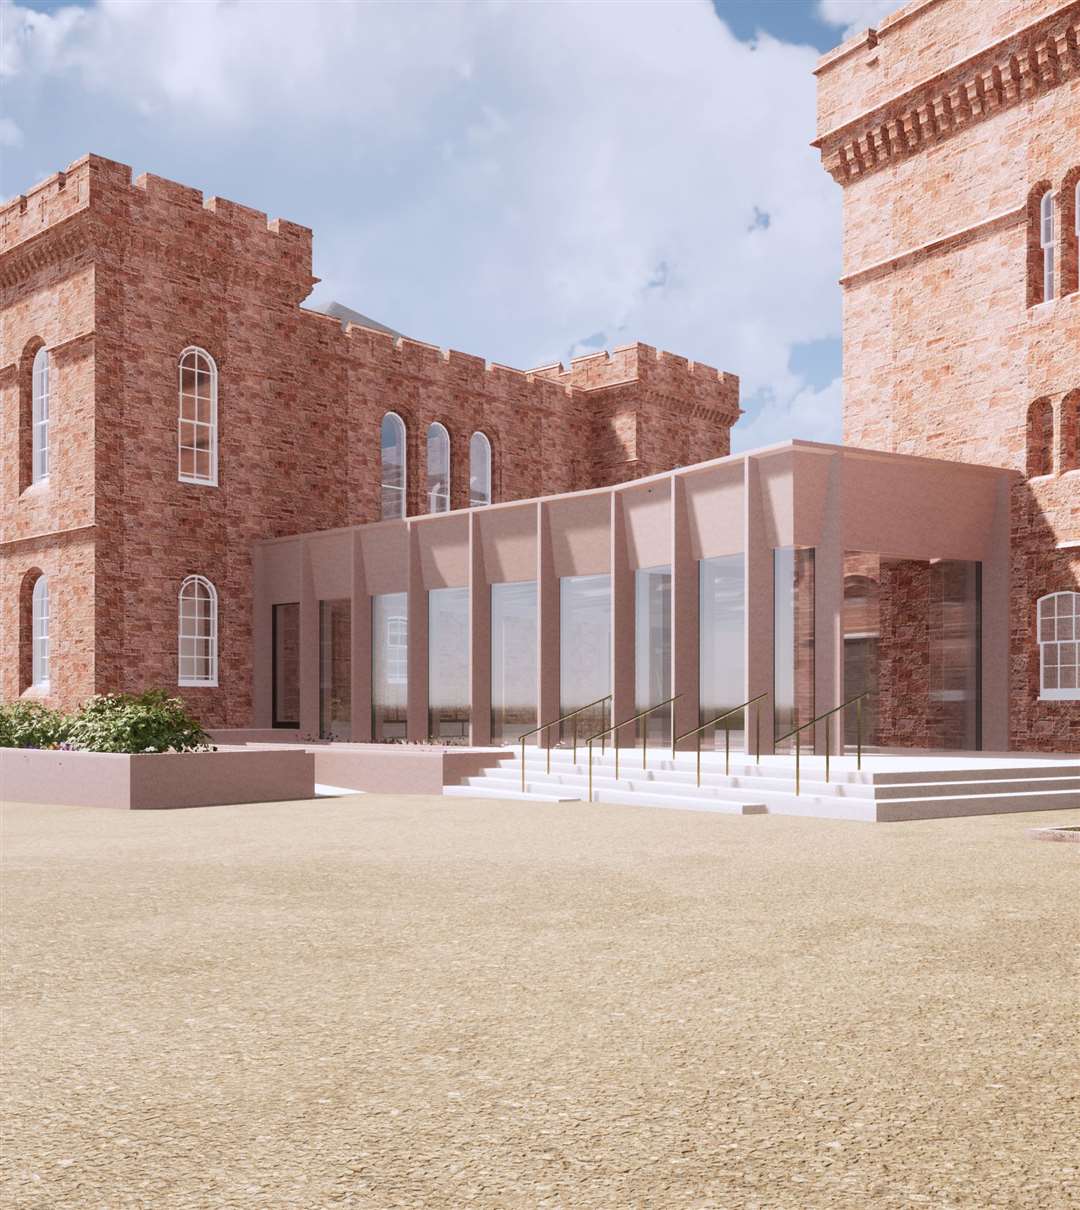 A previously-released image showing an external view of proposed link building at the castle from the east.